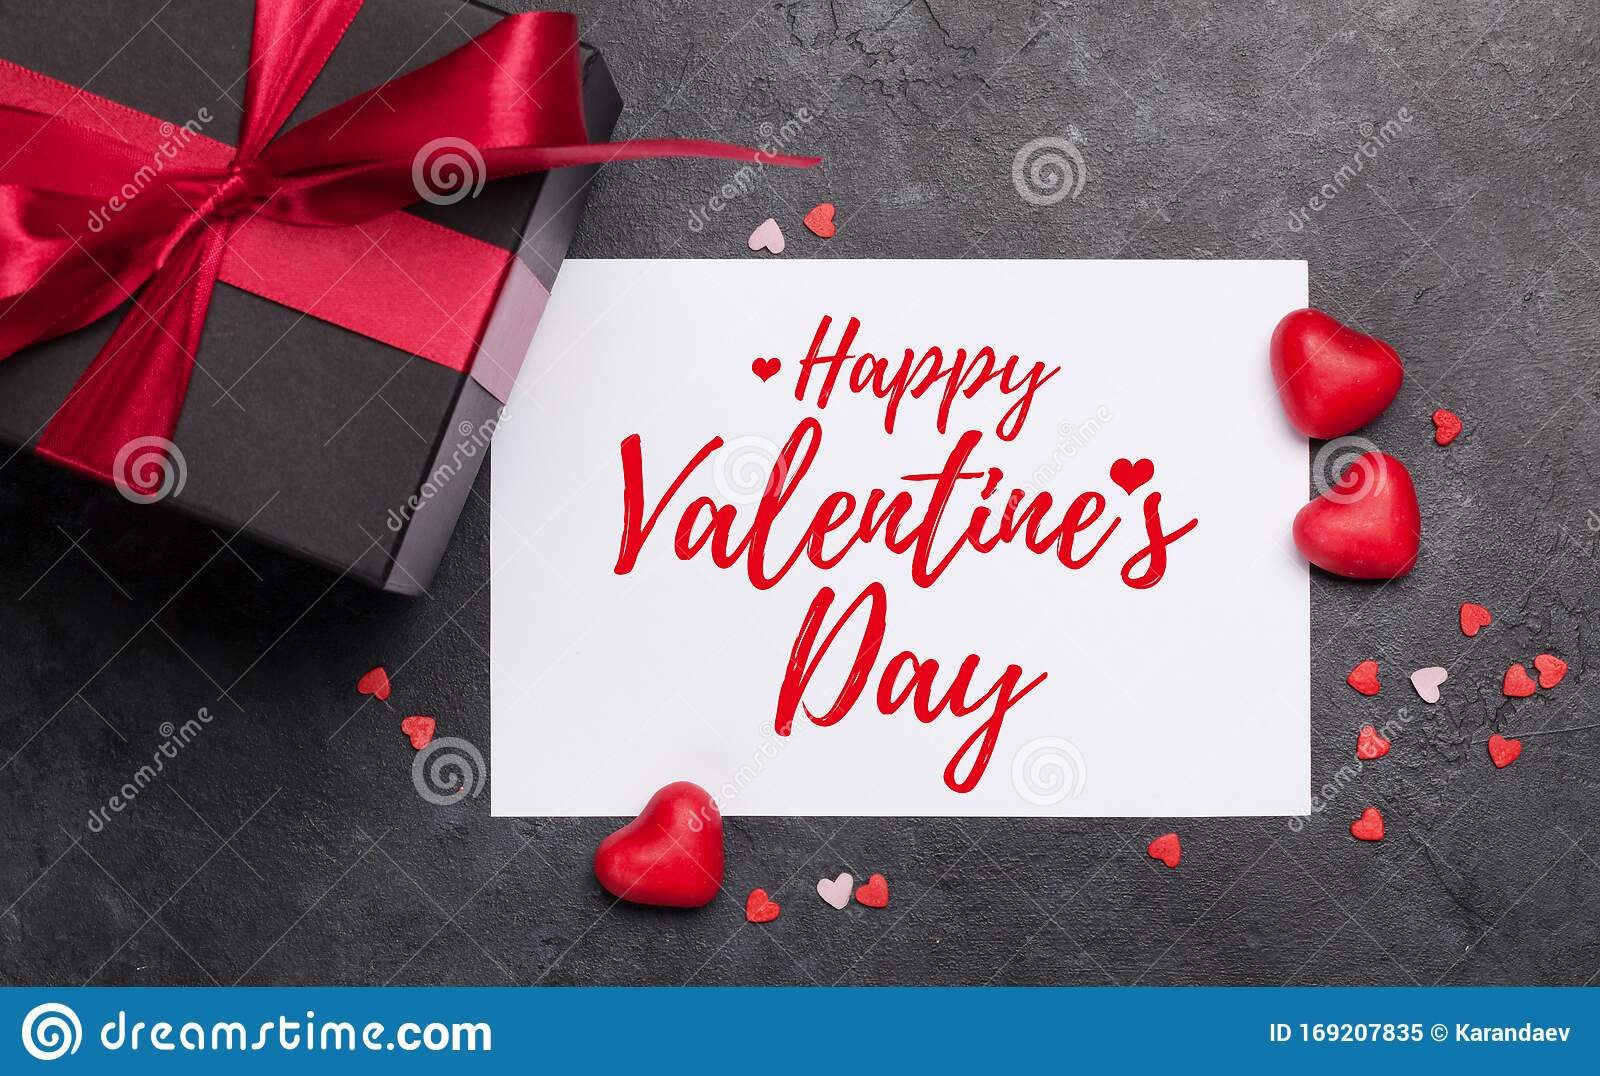 Valentines Day Gift Package
 Valentines Day Card With Gift Box Stock Image Image of